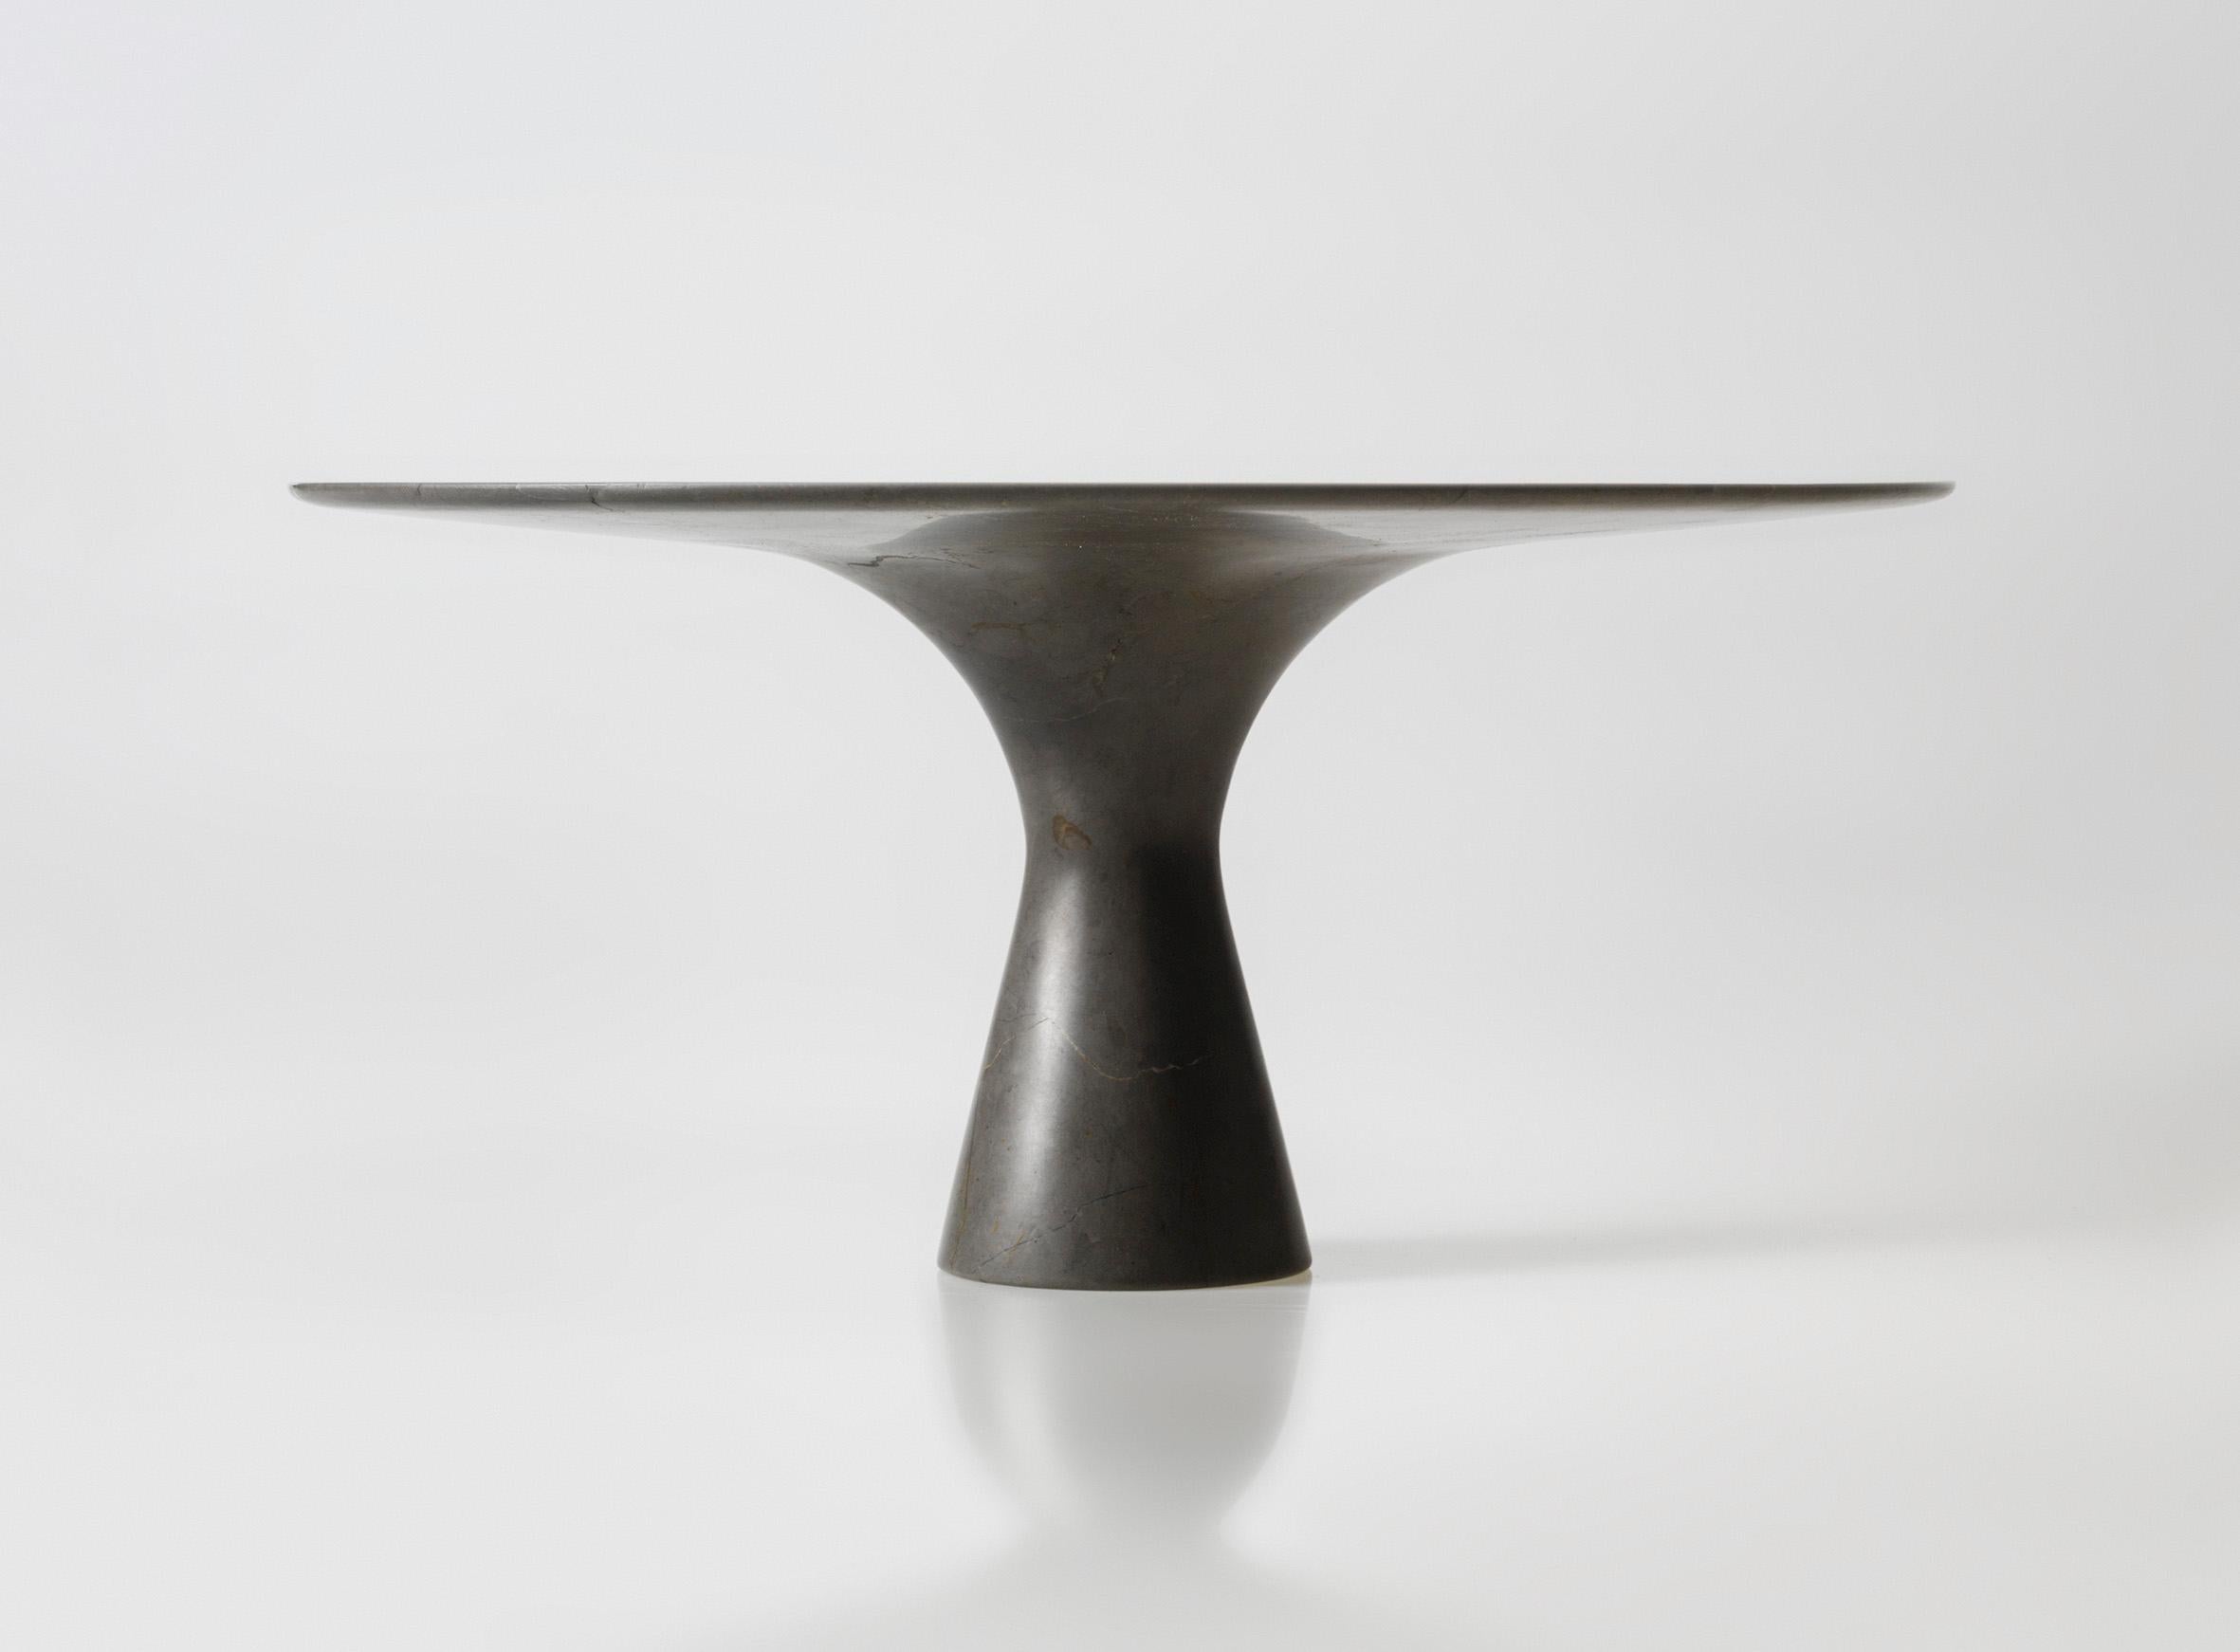 Grafite Refined Contemporary Marble Dining Table 130/75
Dimensions: 130 x 75 cm
Materials: Grafite

Angelo is the essence of a round table in natural stone, a sculptural shape in robust material with elegant lines and refined finishes.

The